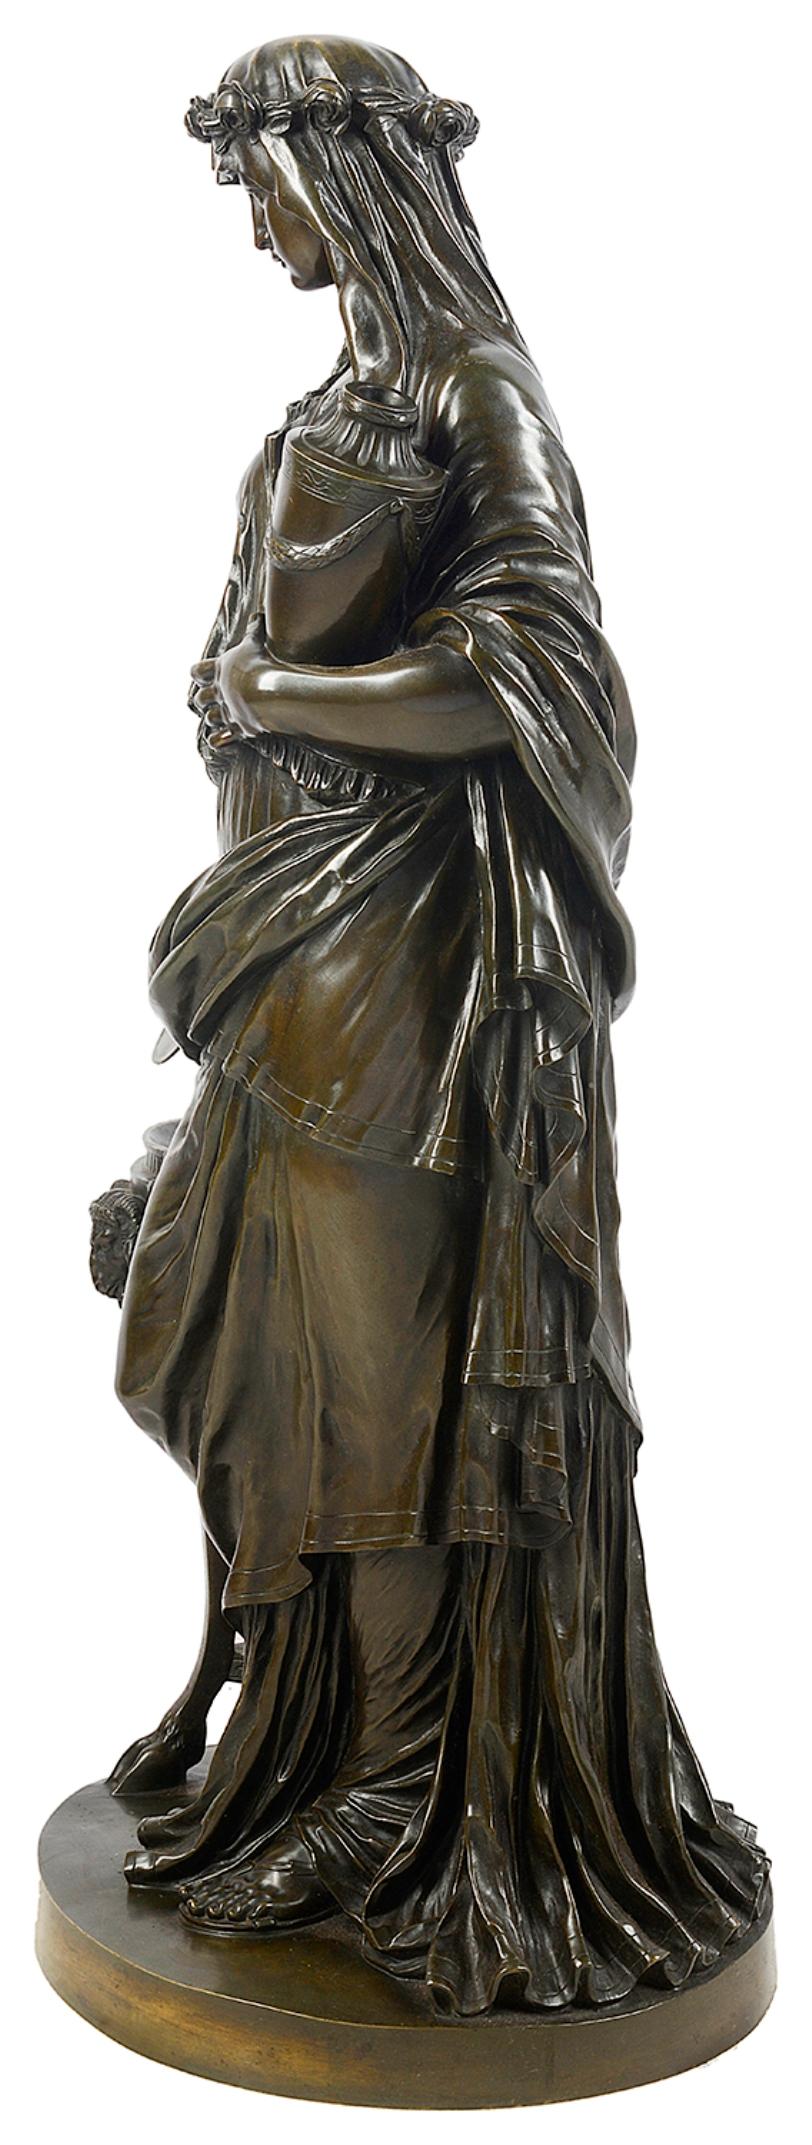 Graux Marly Large Bronze Statue of a Classical Female Figure, 19th Century In Good Condition For Sale In Brighton, Sussex